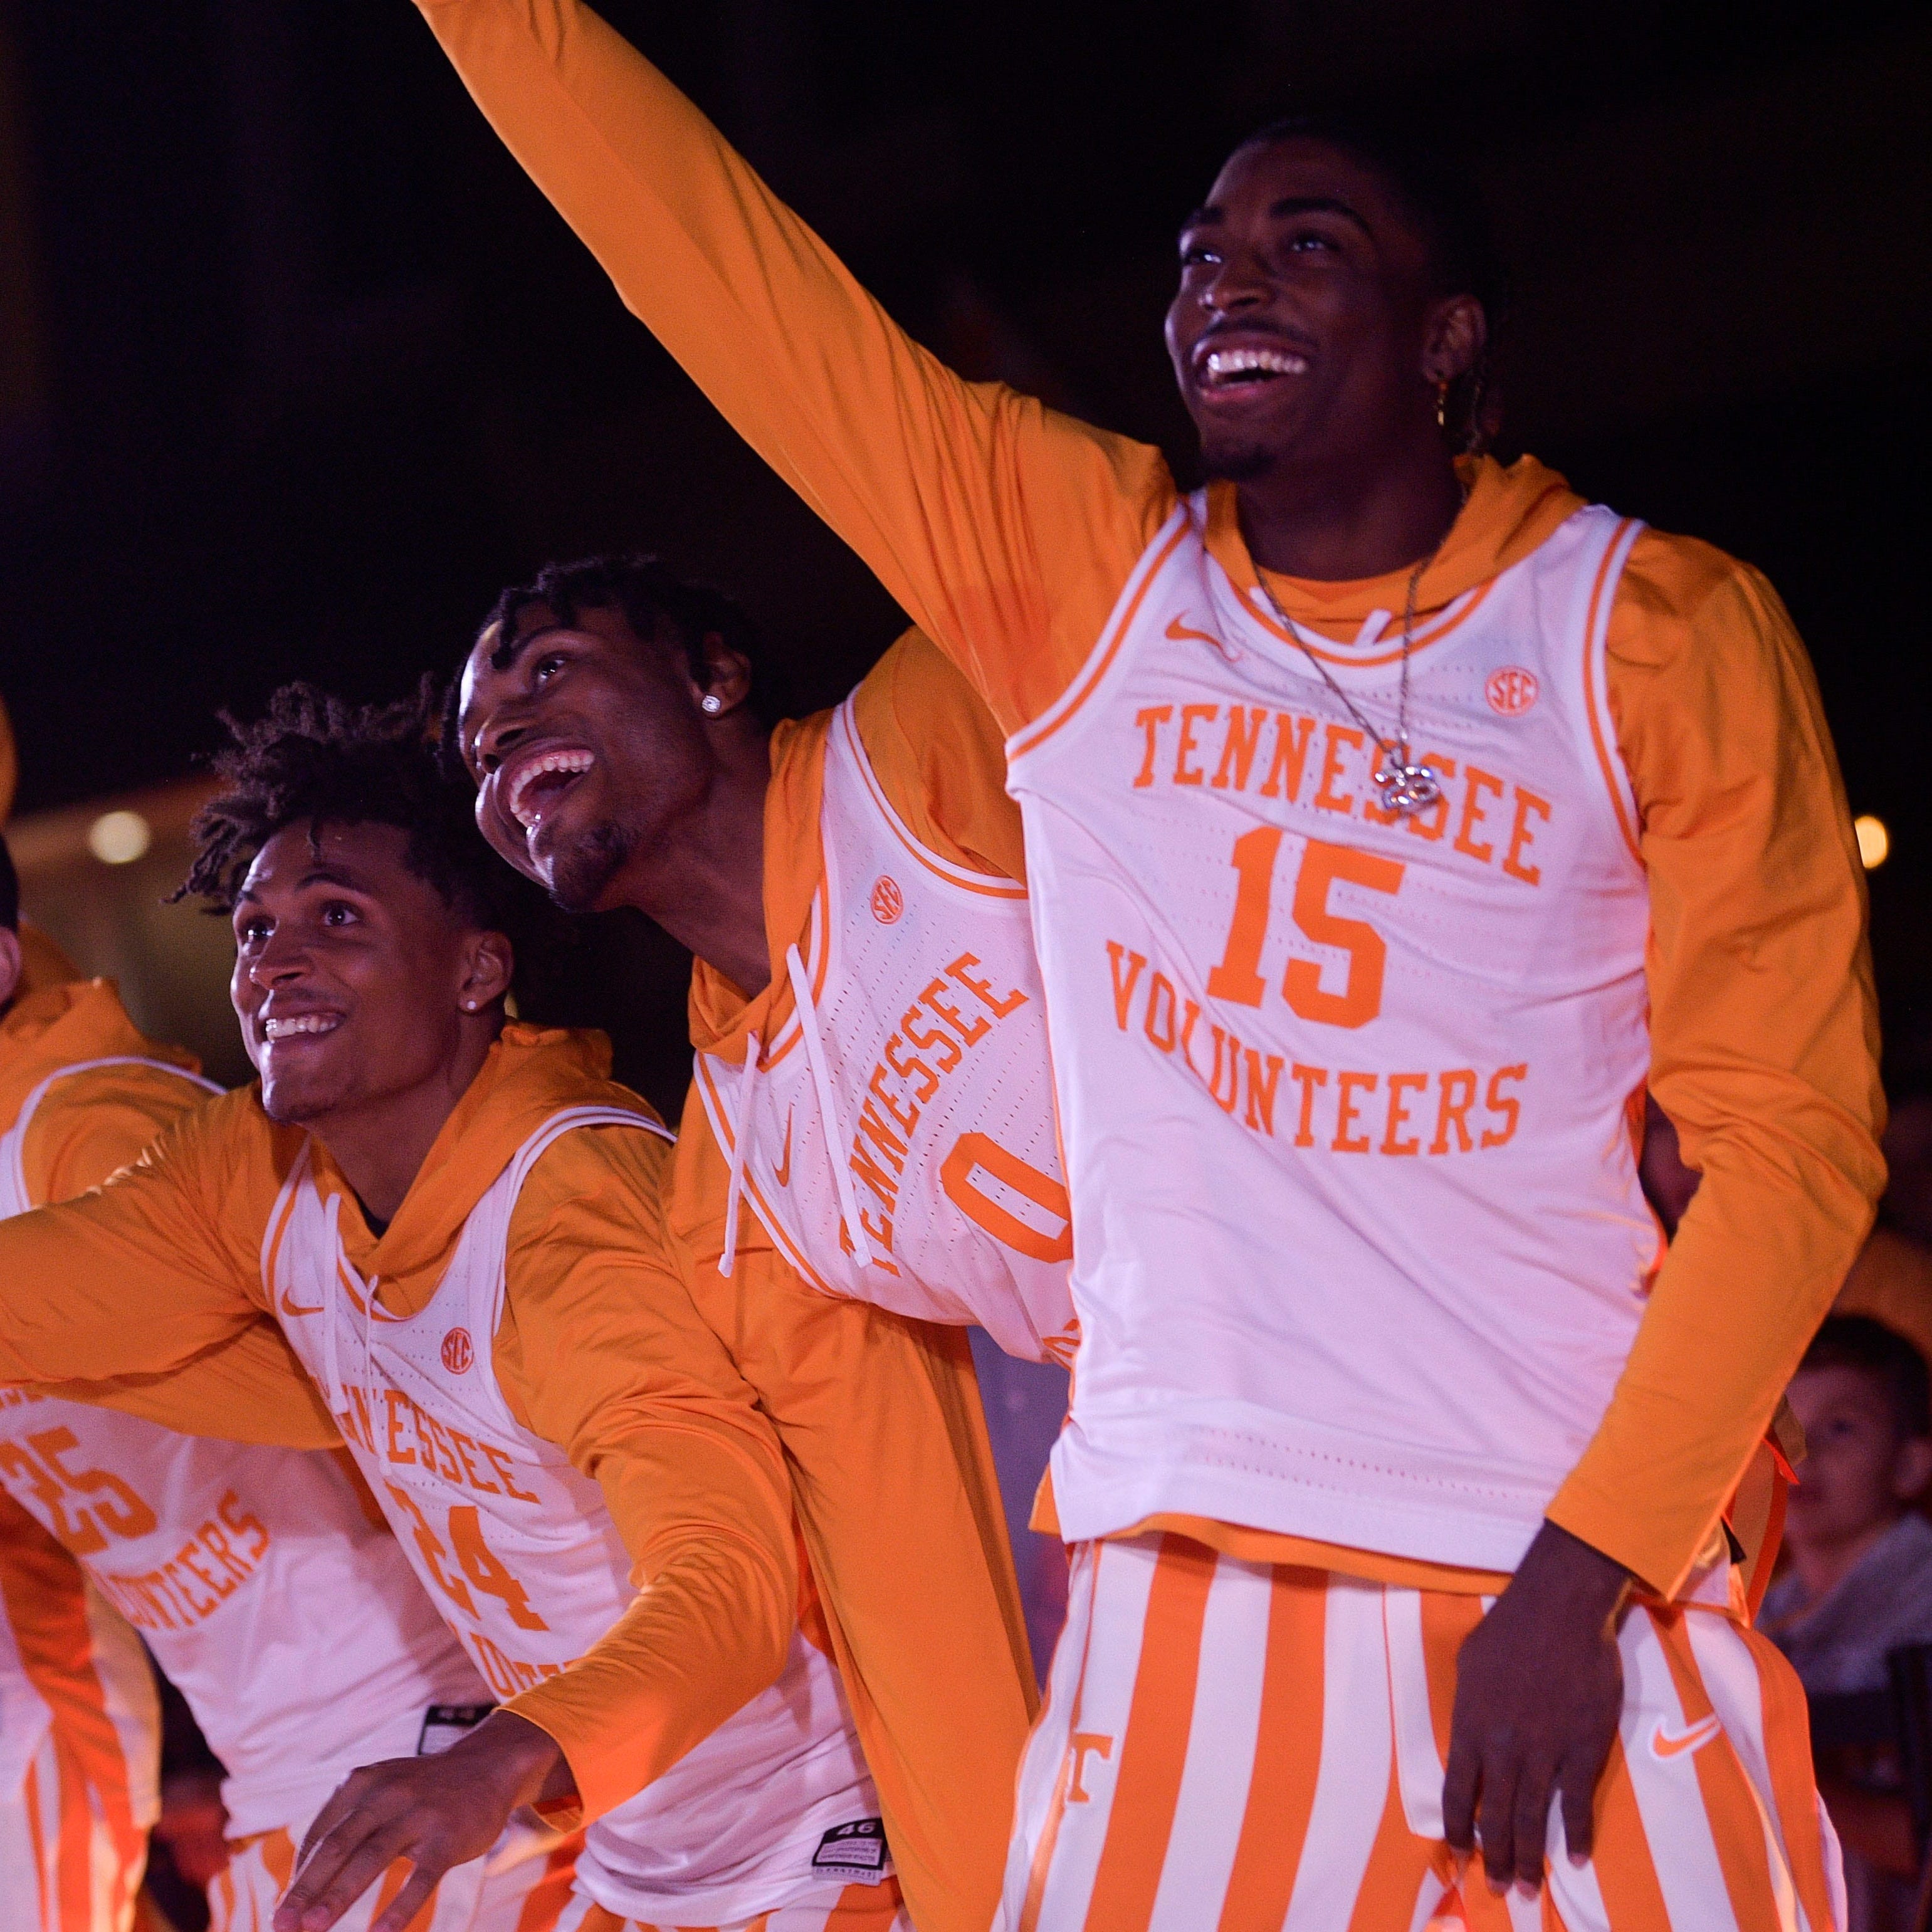 The Tennessee men are looking to make their first Final Four.